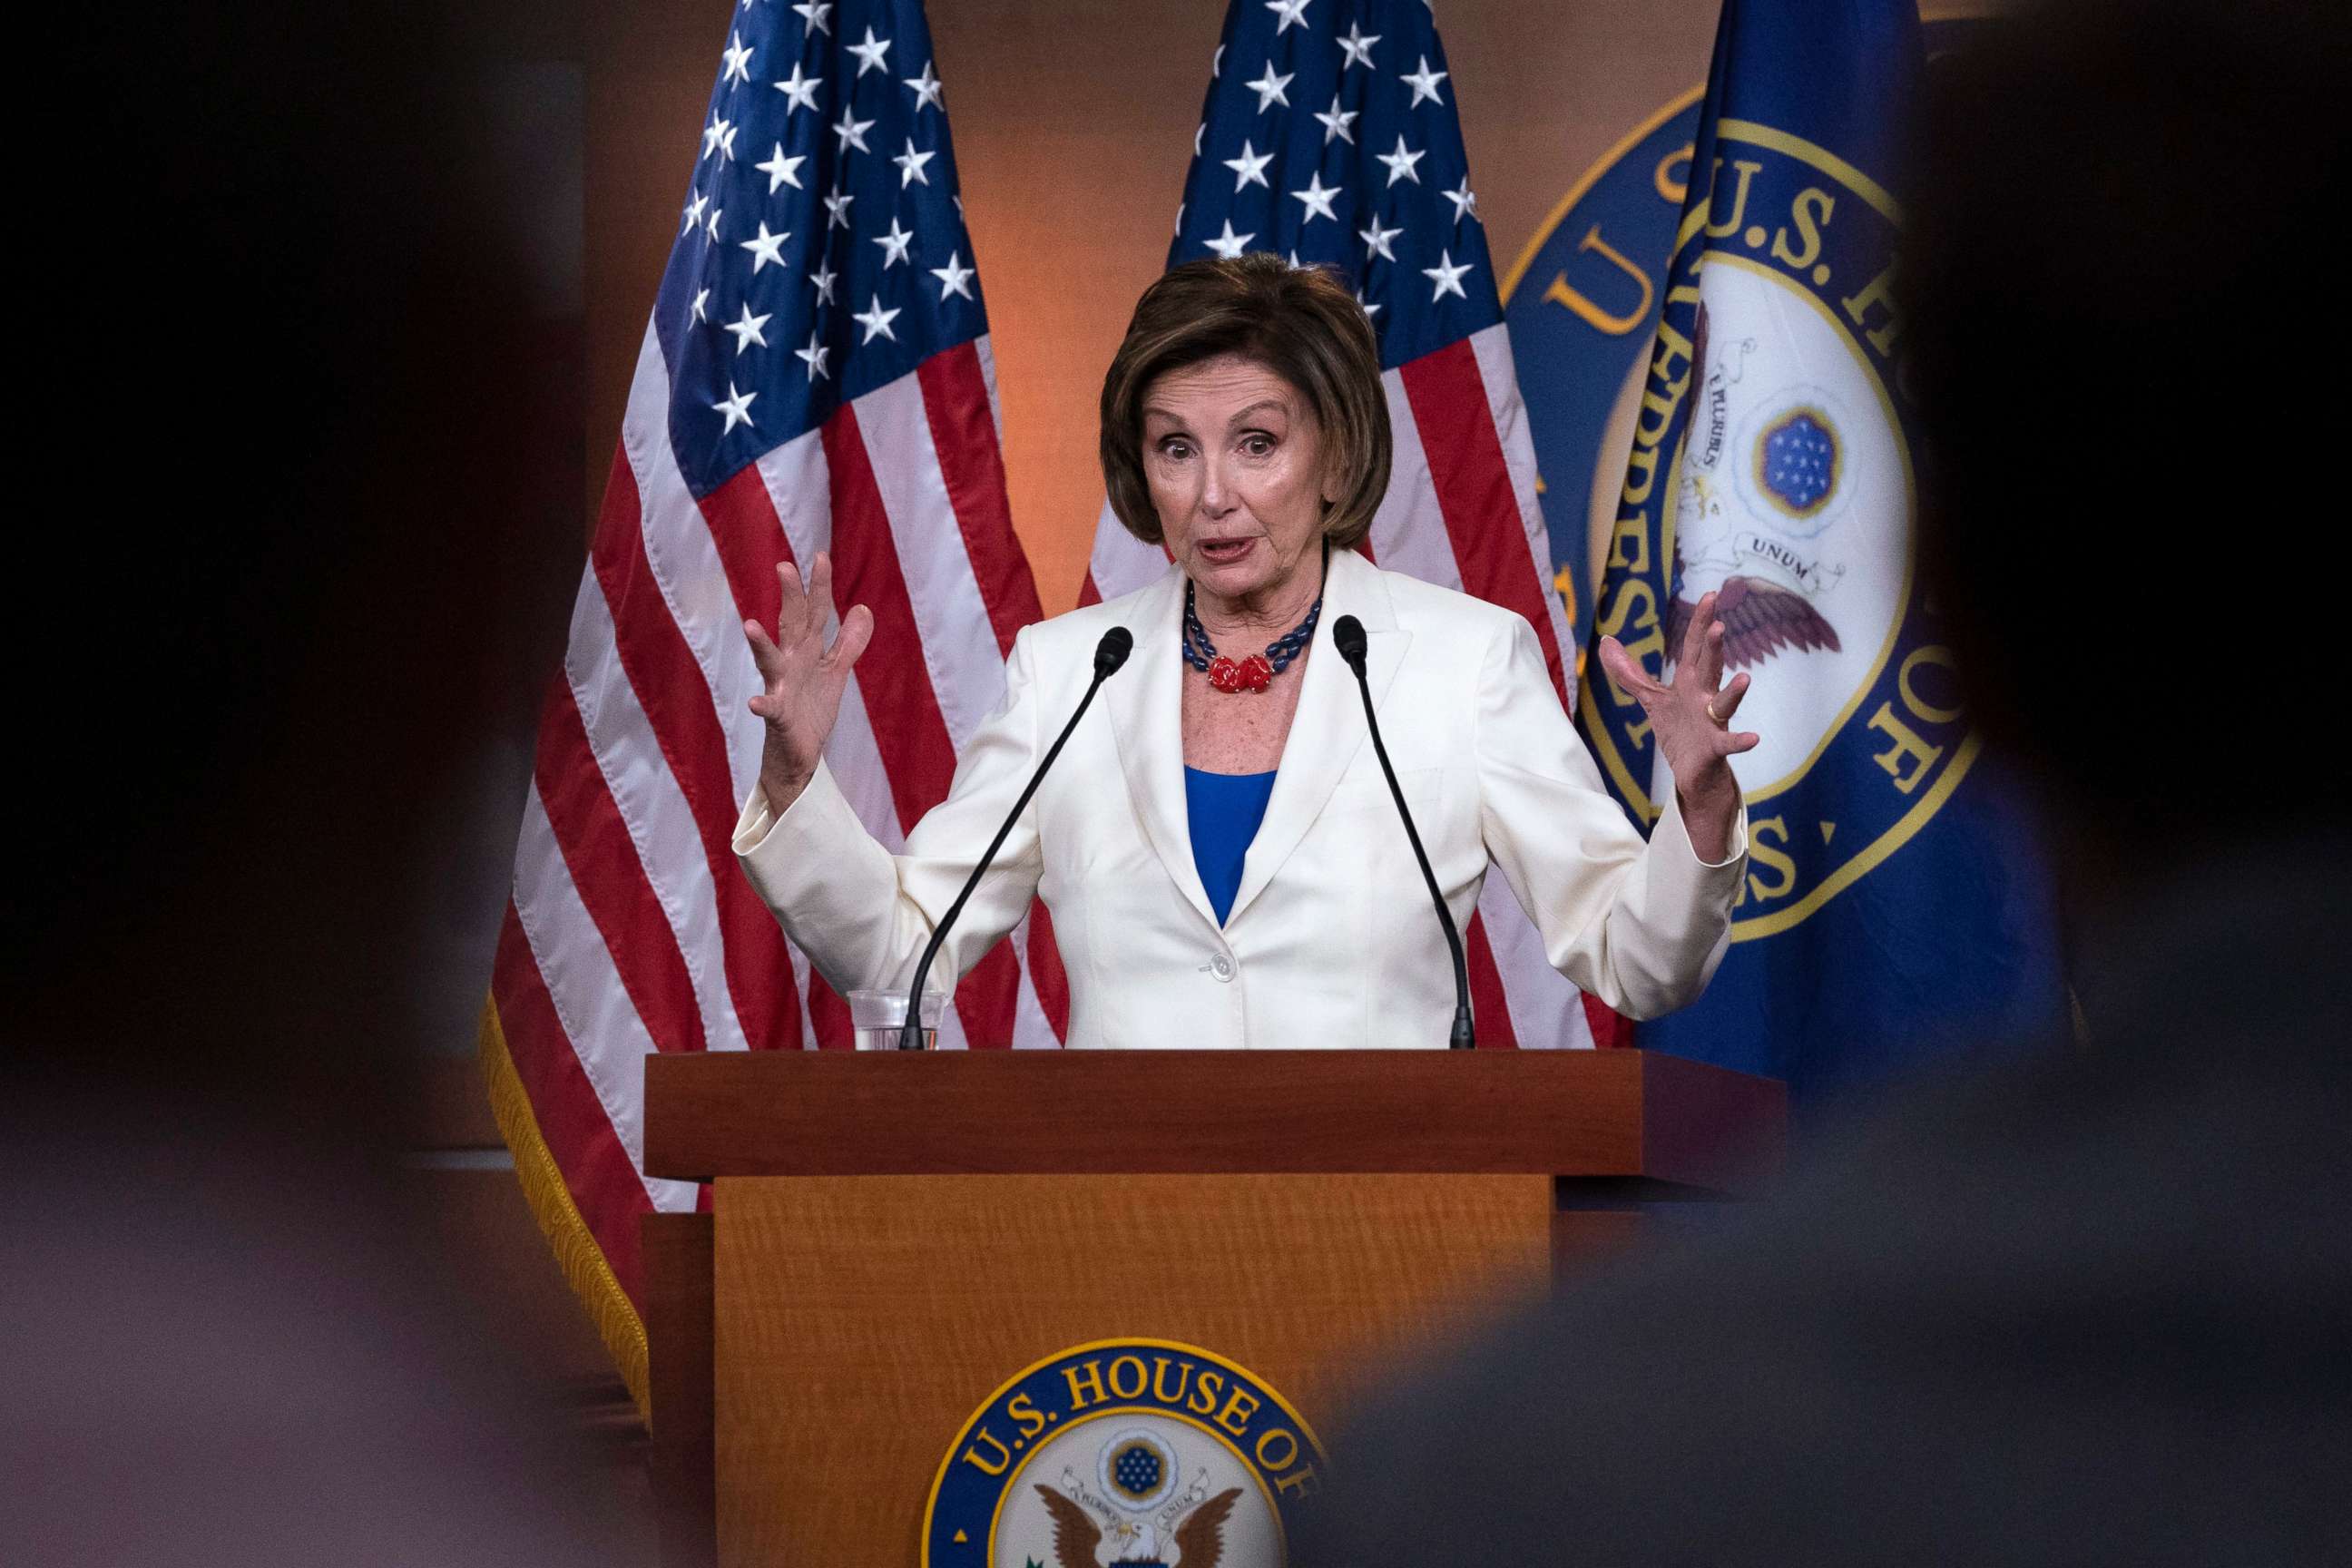 PHOTO: Speaker of the House Nancy Pelosi speaks during a news conference on Capitol Hill in Washington, May 20, 2021.